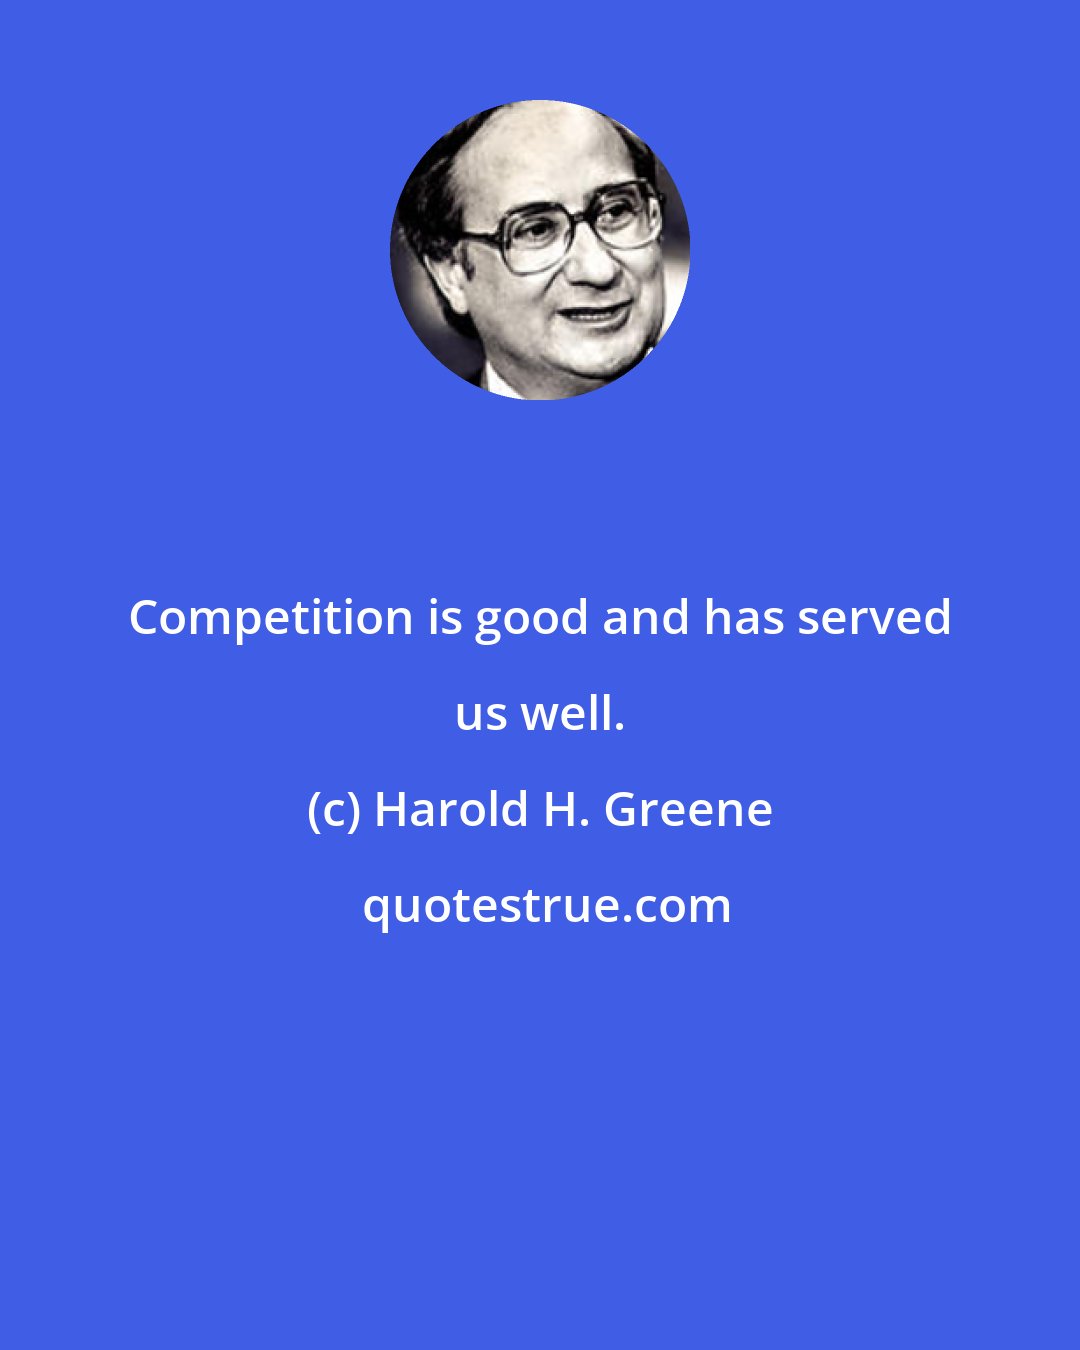 Harold H. Greene: Competition is good and has served us well.